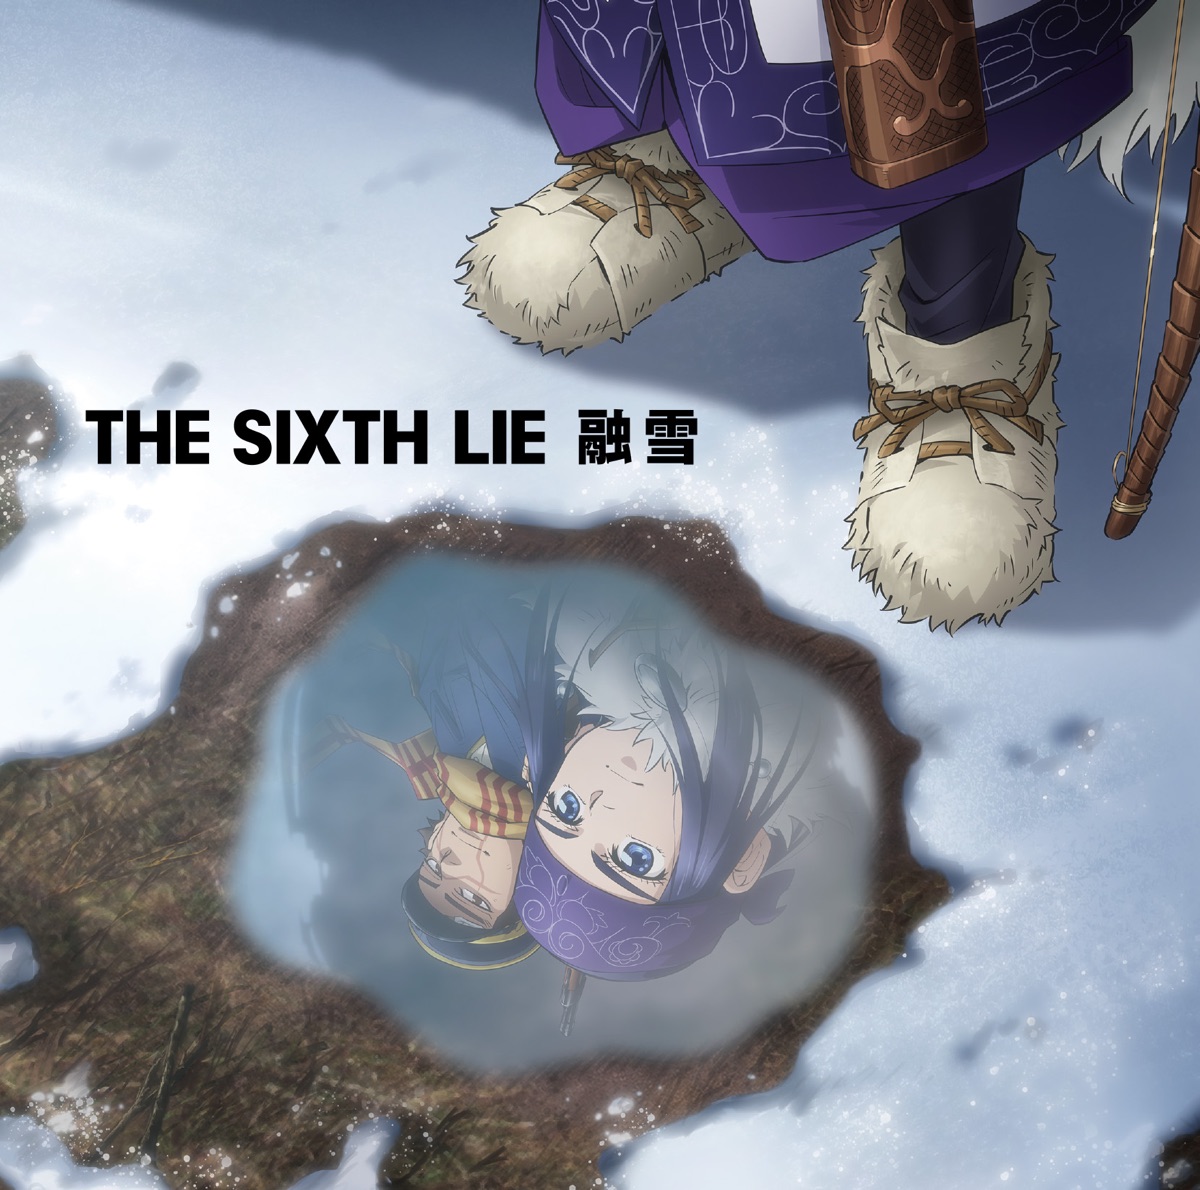 Cover art for『THE SIXTH LIE - 融雪』from the release『Yuusetsu